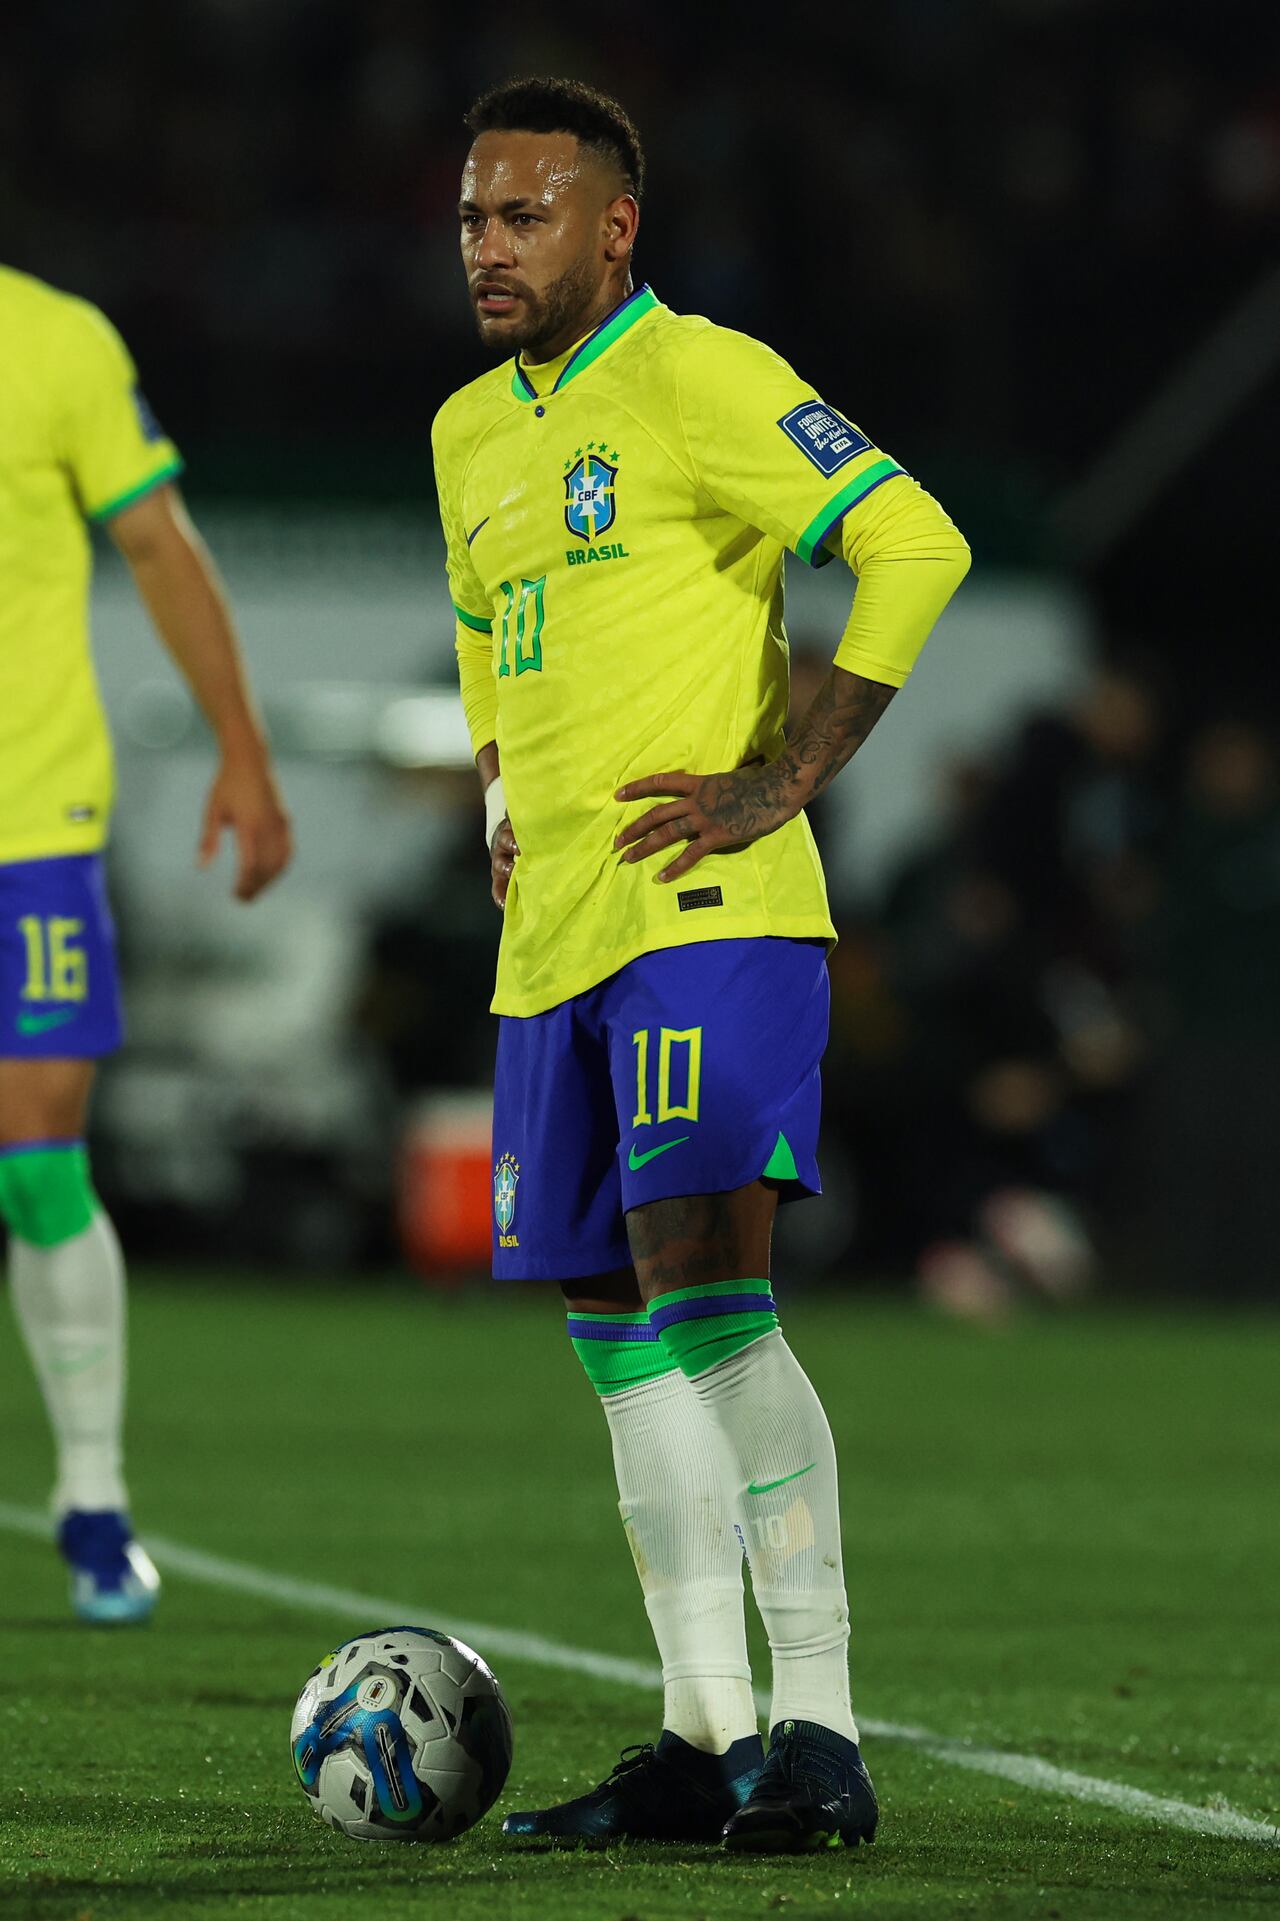 Brazil's forward Neymar stands in front of the ball during the 2026 FIFA World Cup South American qualification football match between Uruguay and Brazil at the Centenario Stadium in Montevideo on October 17, 2023. (Photo by Pablo PORCIUNCULA / AFP)